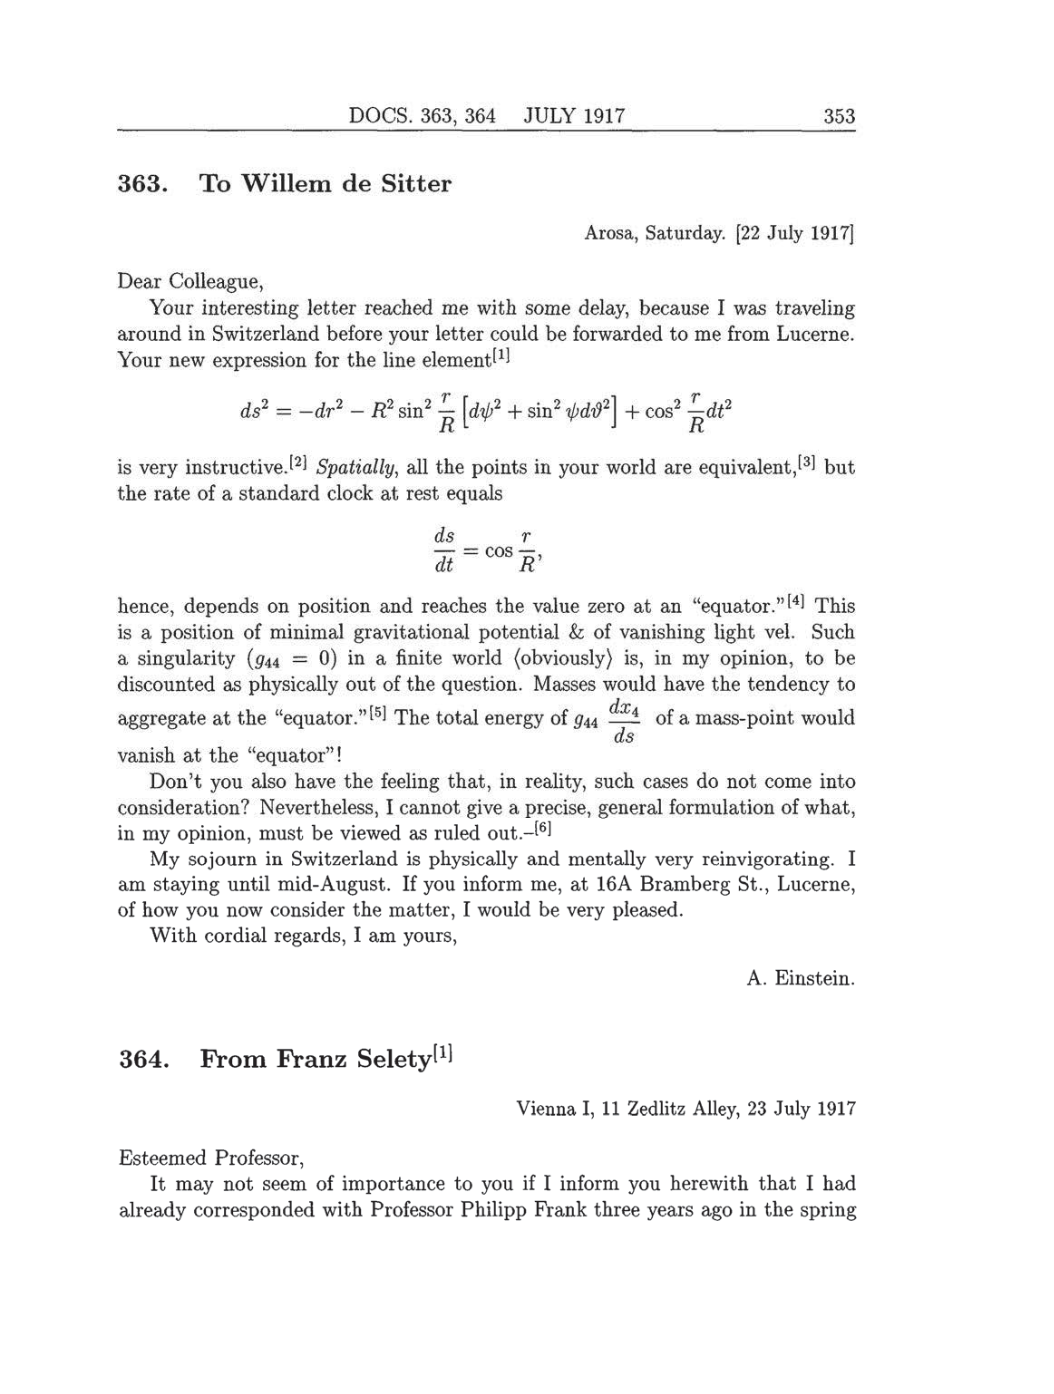 Volume 8: The Berlin Years: Correspondence, 1914-1918 (English translation supplement) page 353